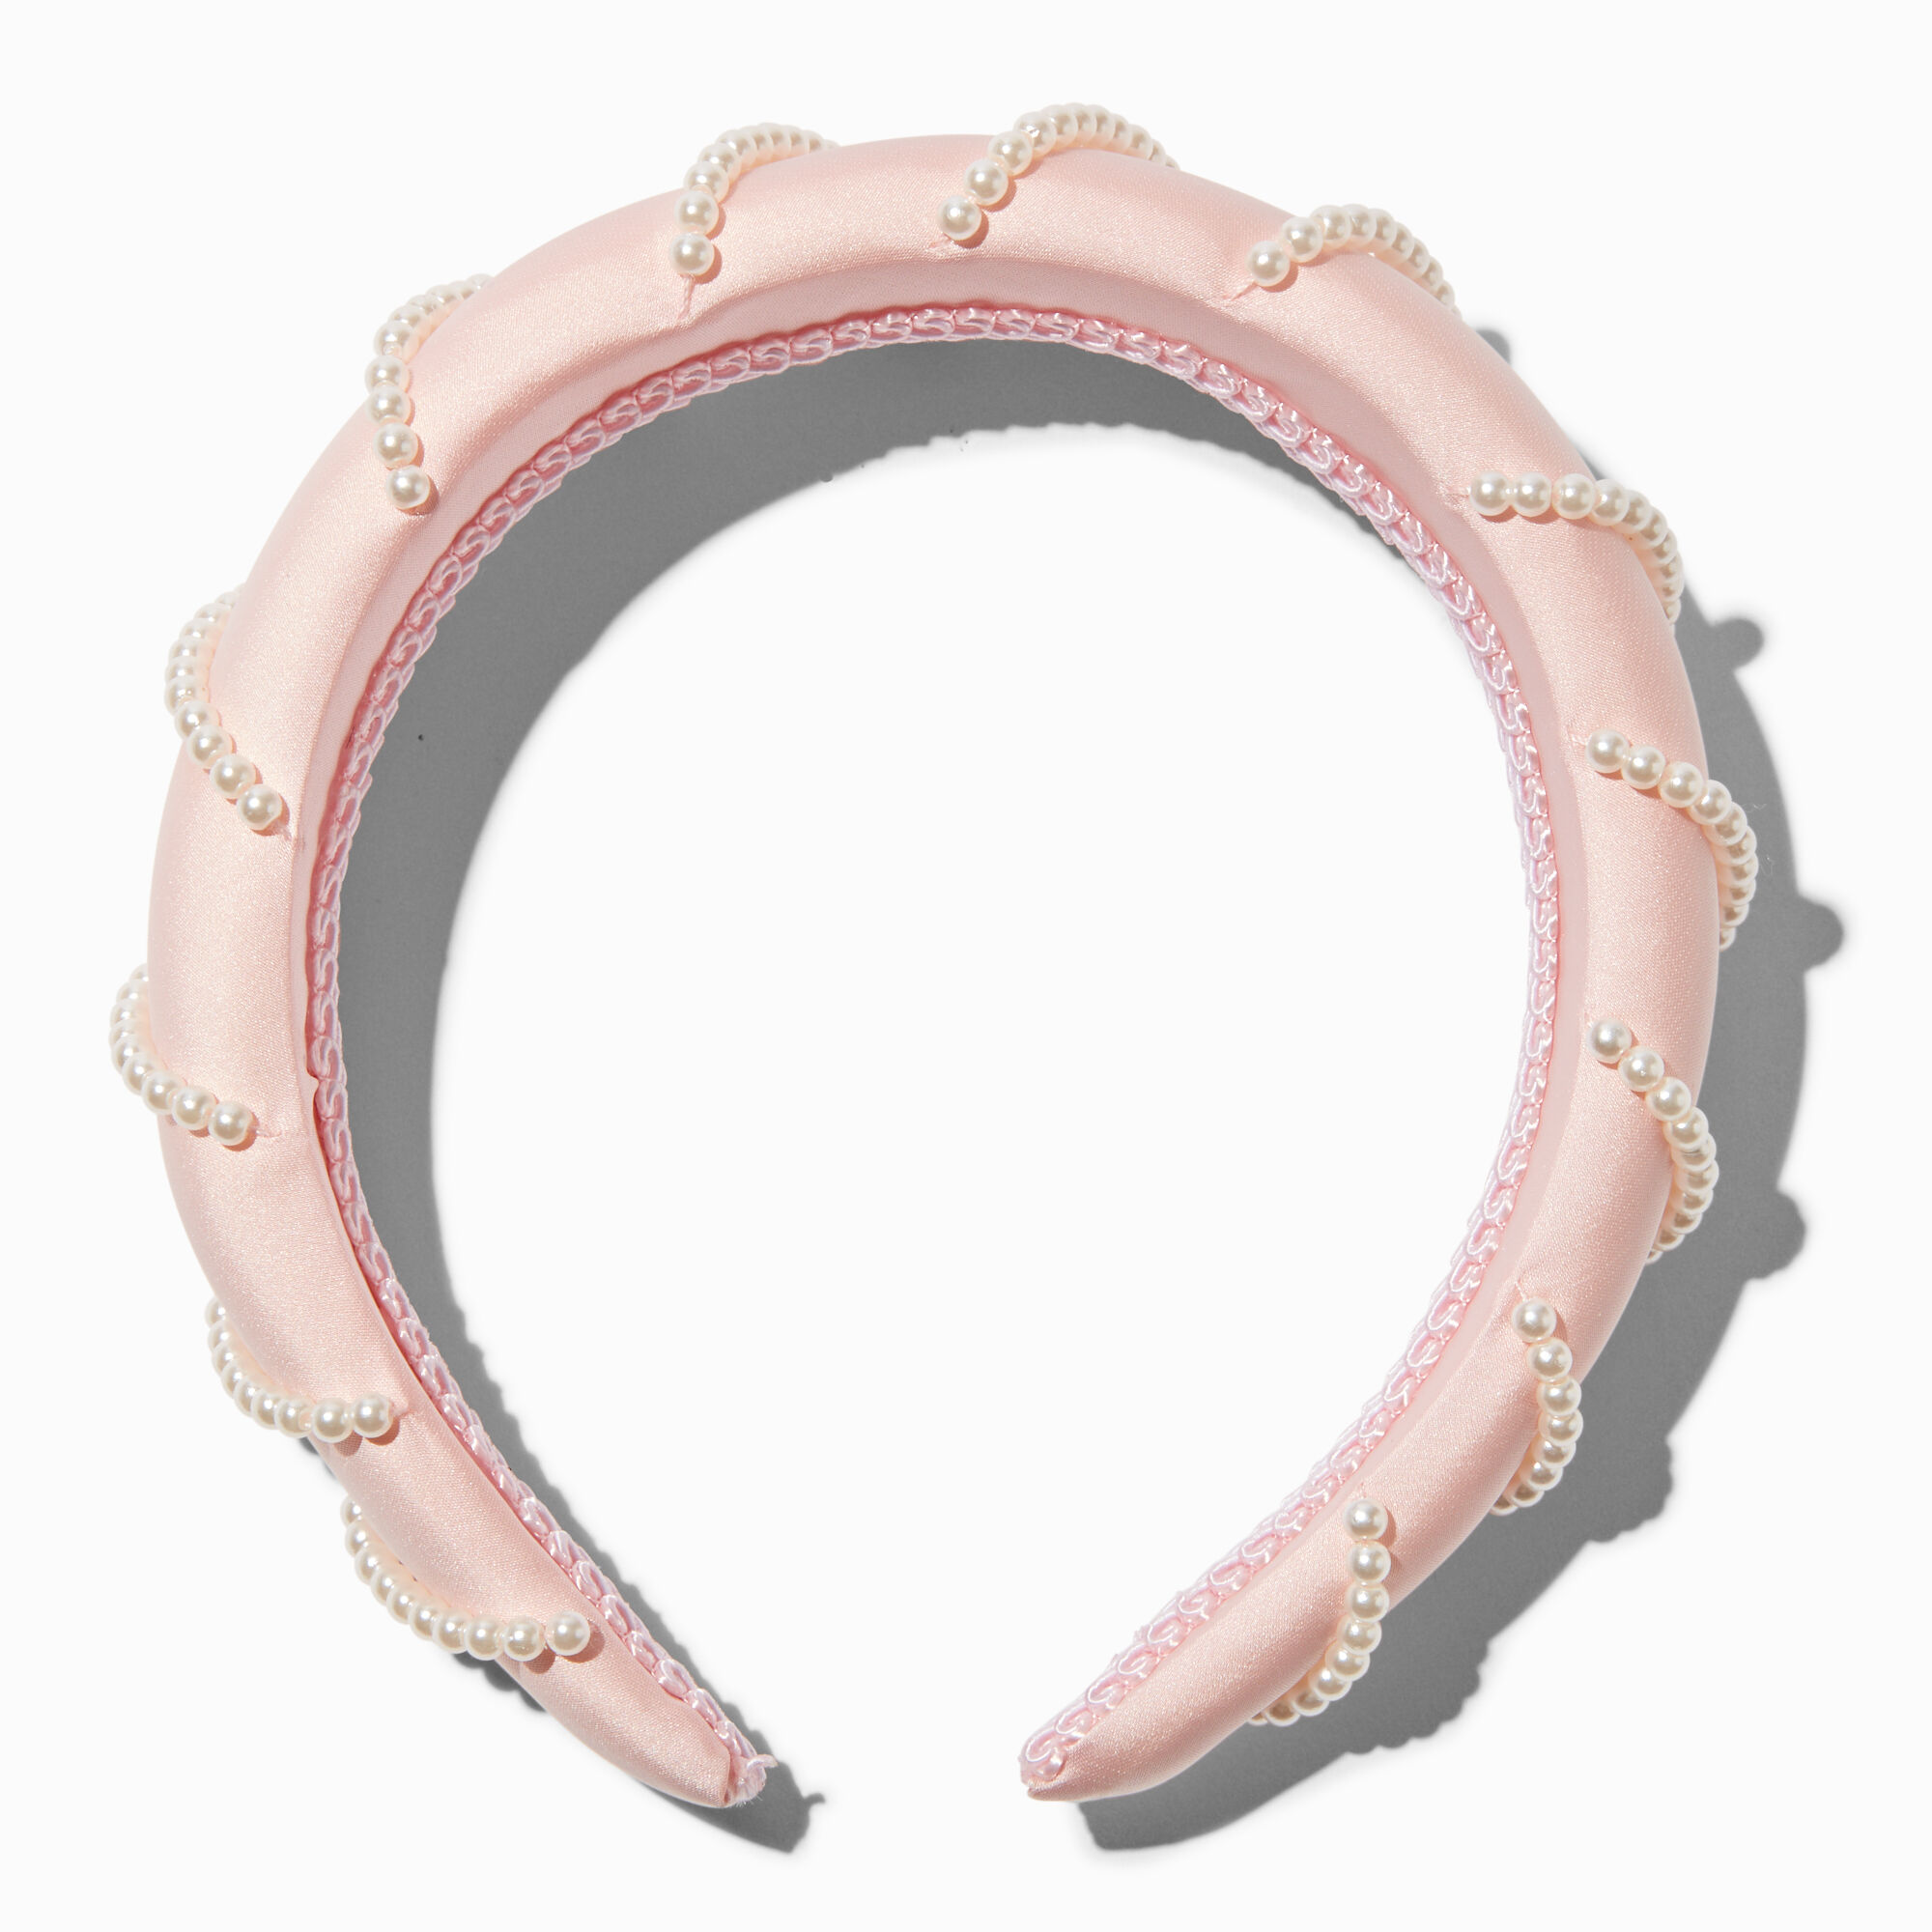 View Claires Club Satin Pearl Headband Pink information